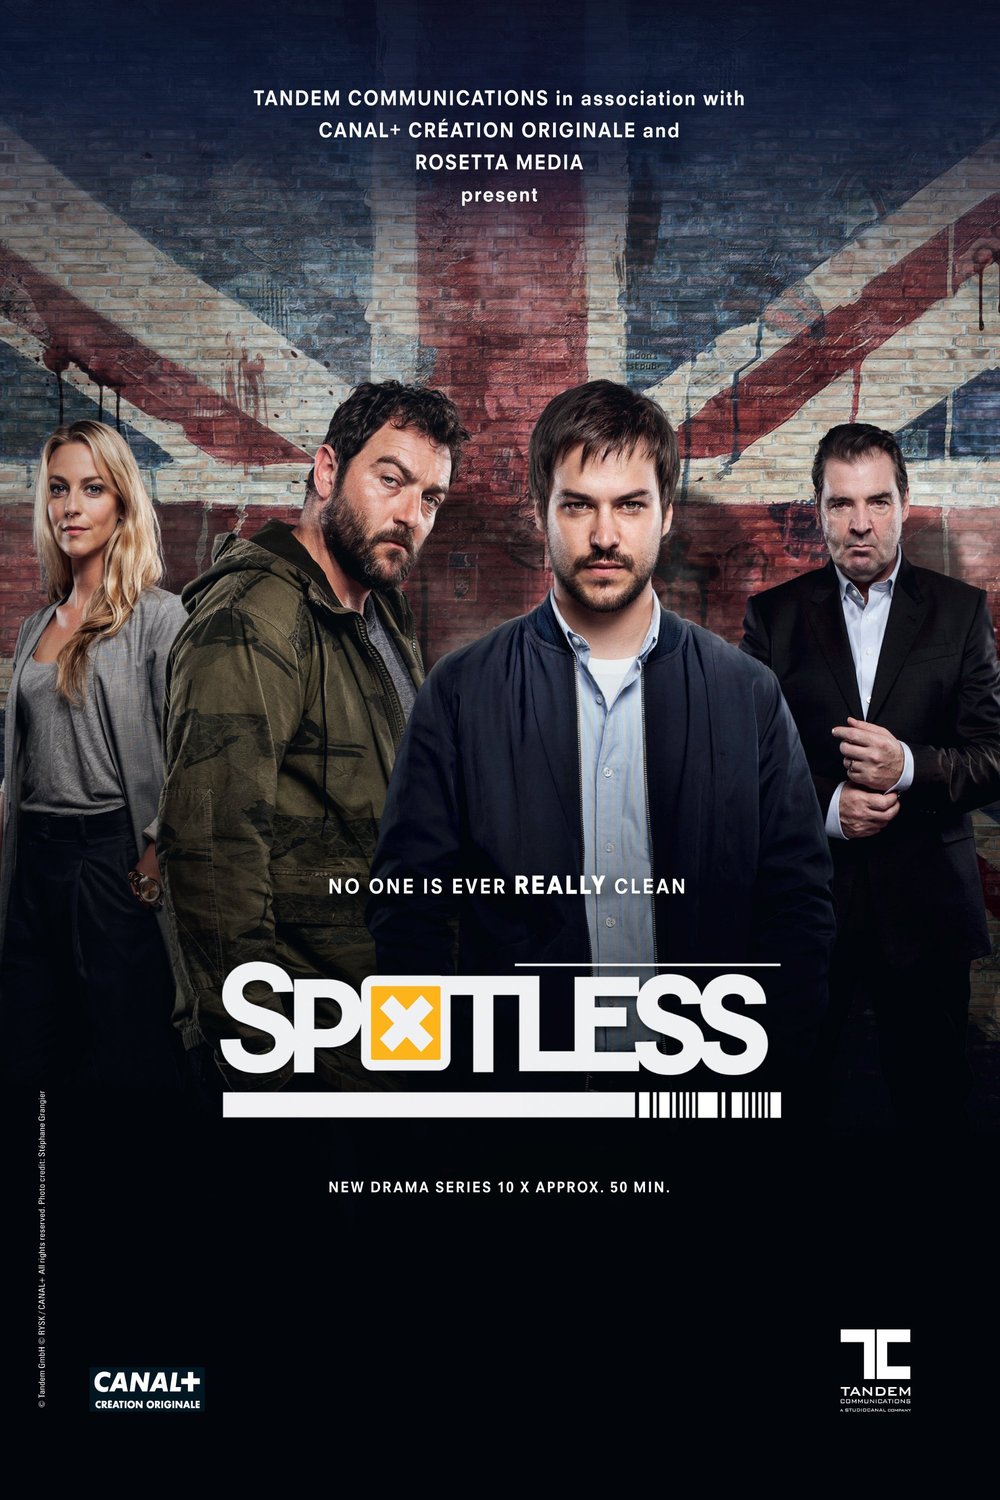 Poster of the movie Spotless